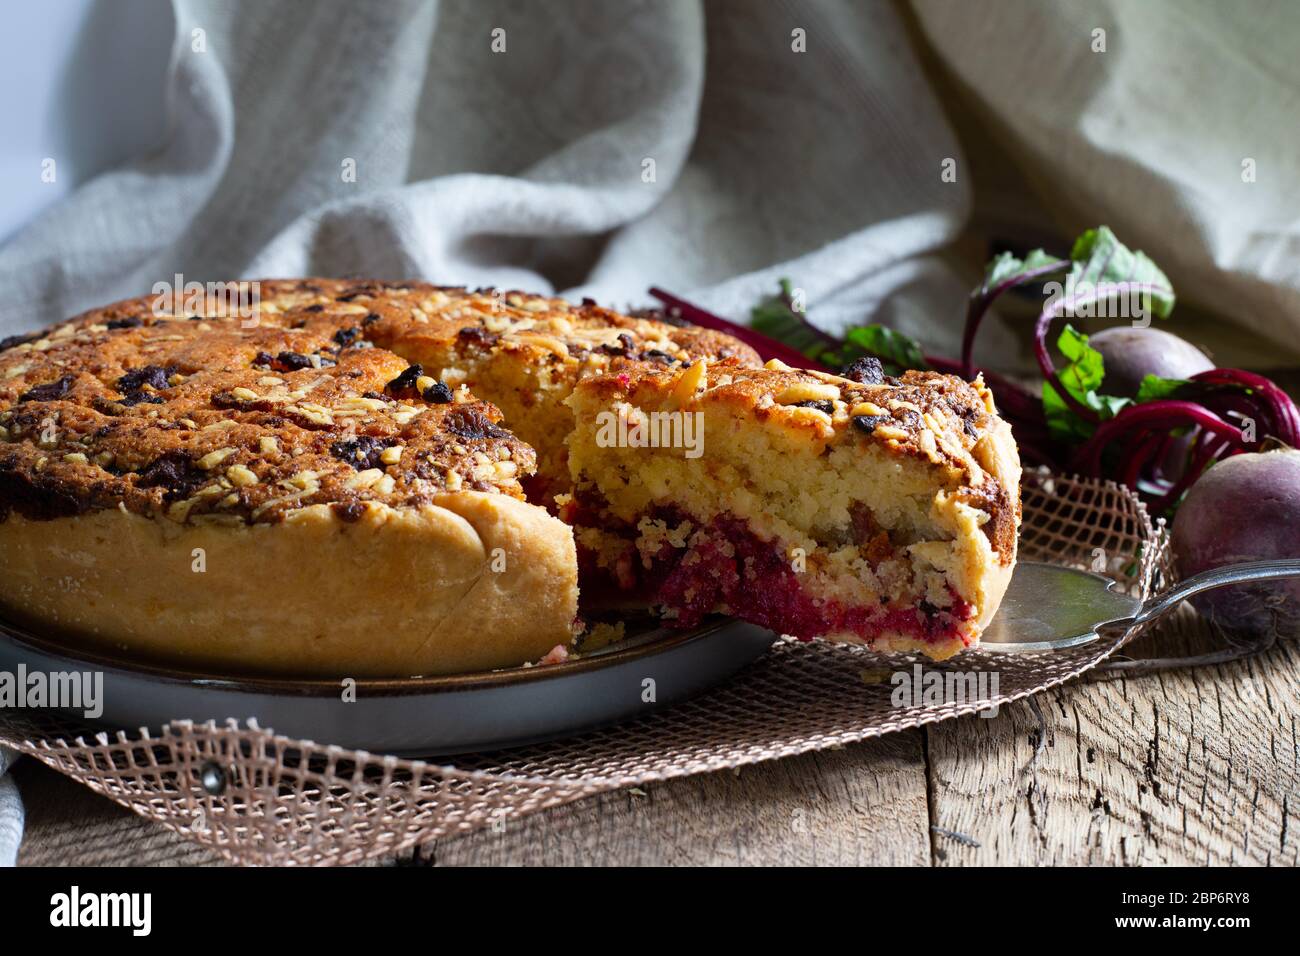 Homemade delicious beetroot pastry tart on kitchen grill with slice of cake and fresh beetroots on rustic wooden bakground. Menu, board, banner. Vintage traditional rustic kitchen. British meal Stock Photo